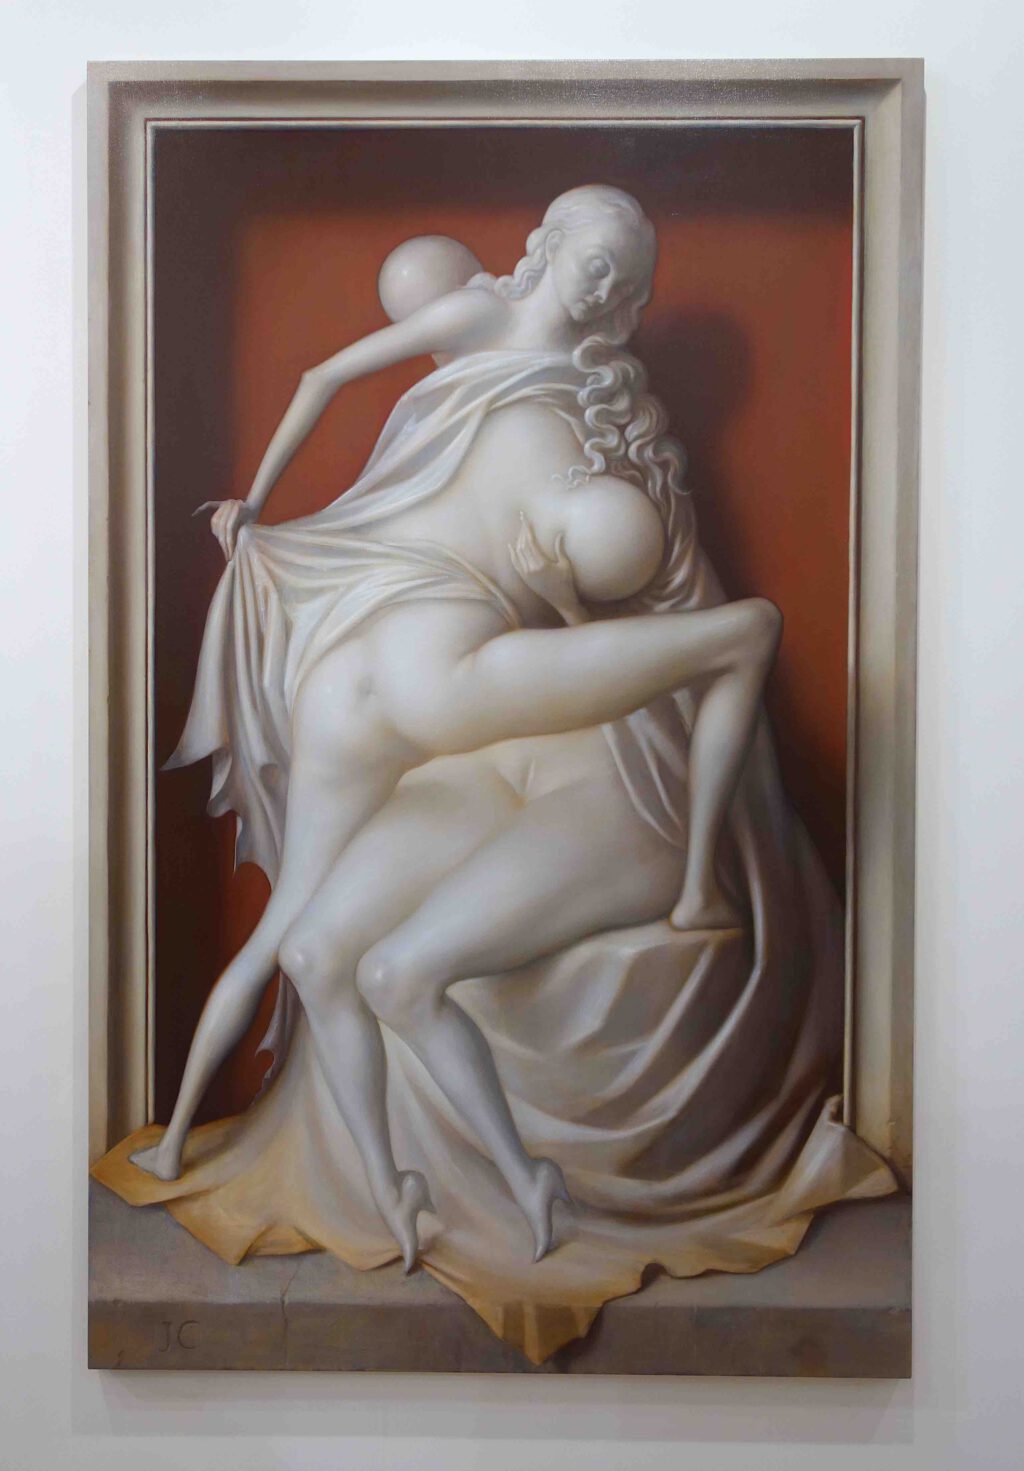 John Currin @ Gagosian. No further information available.